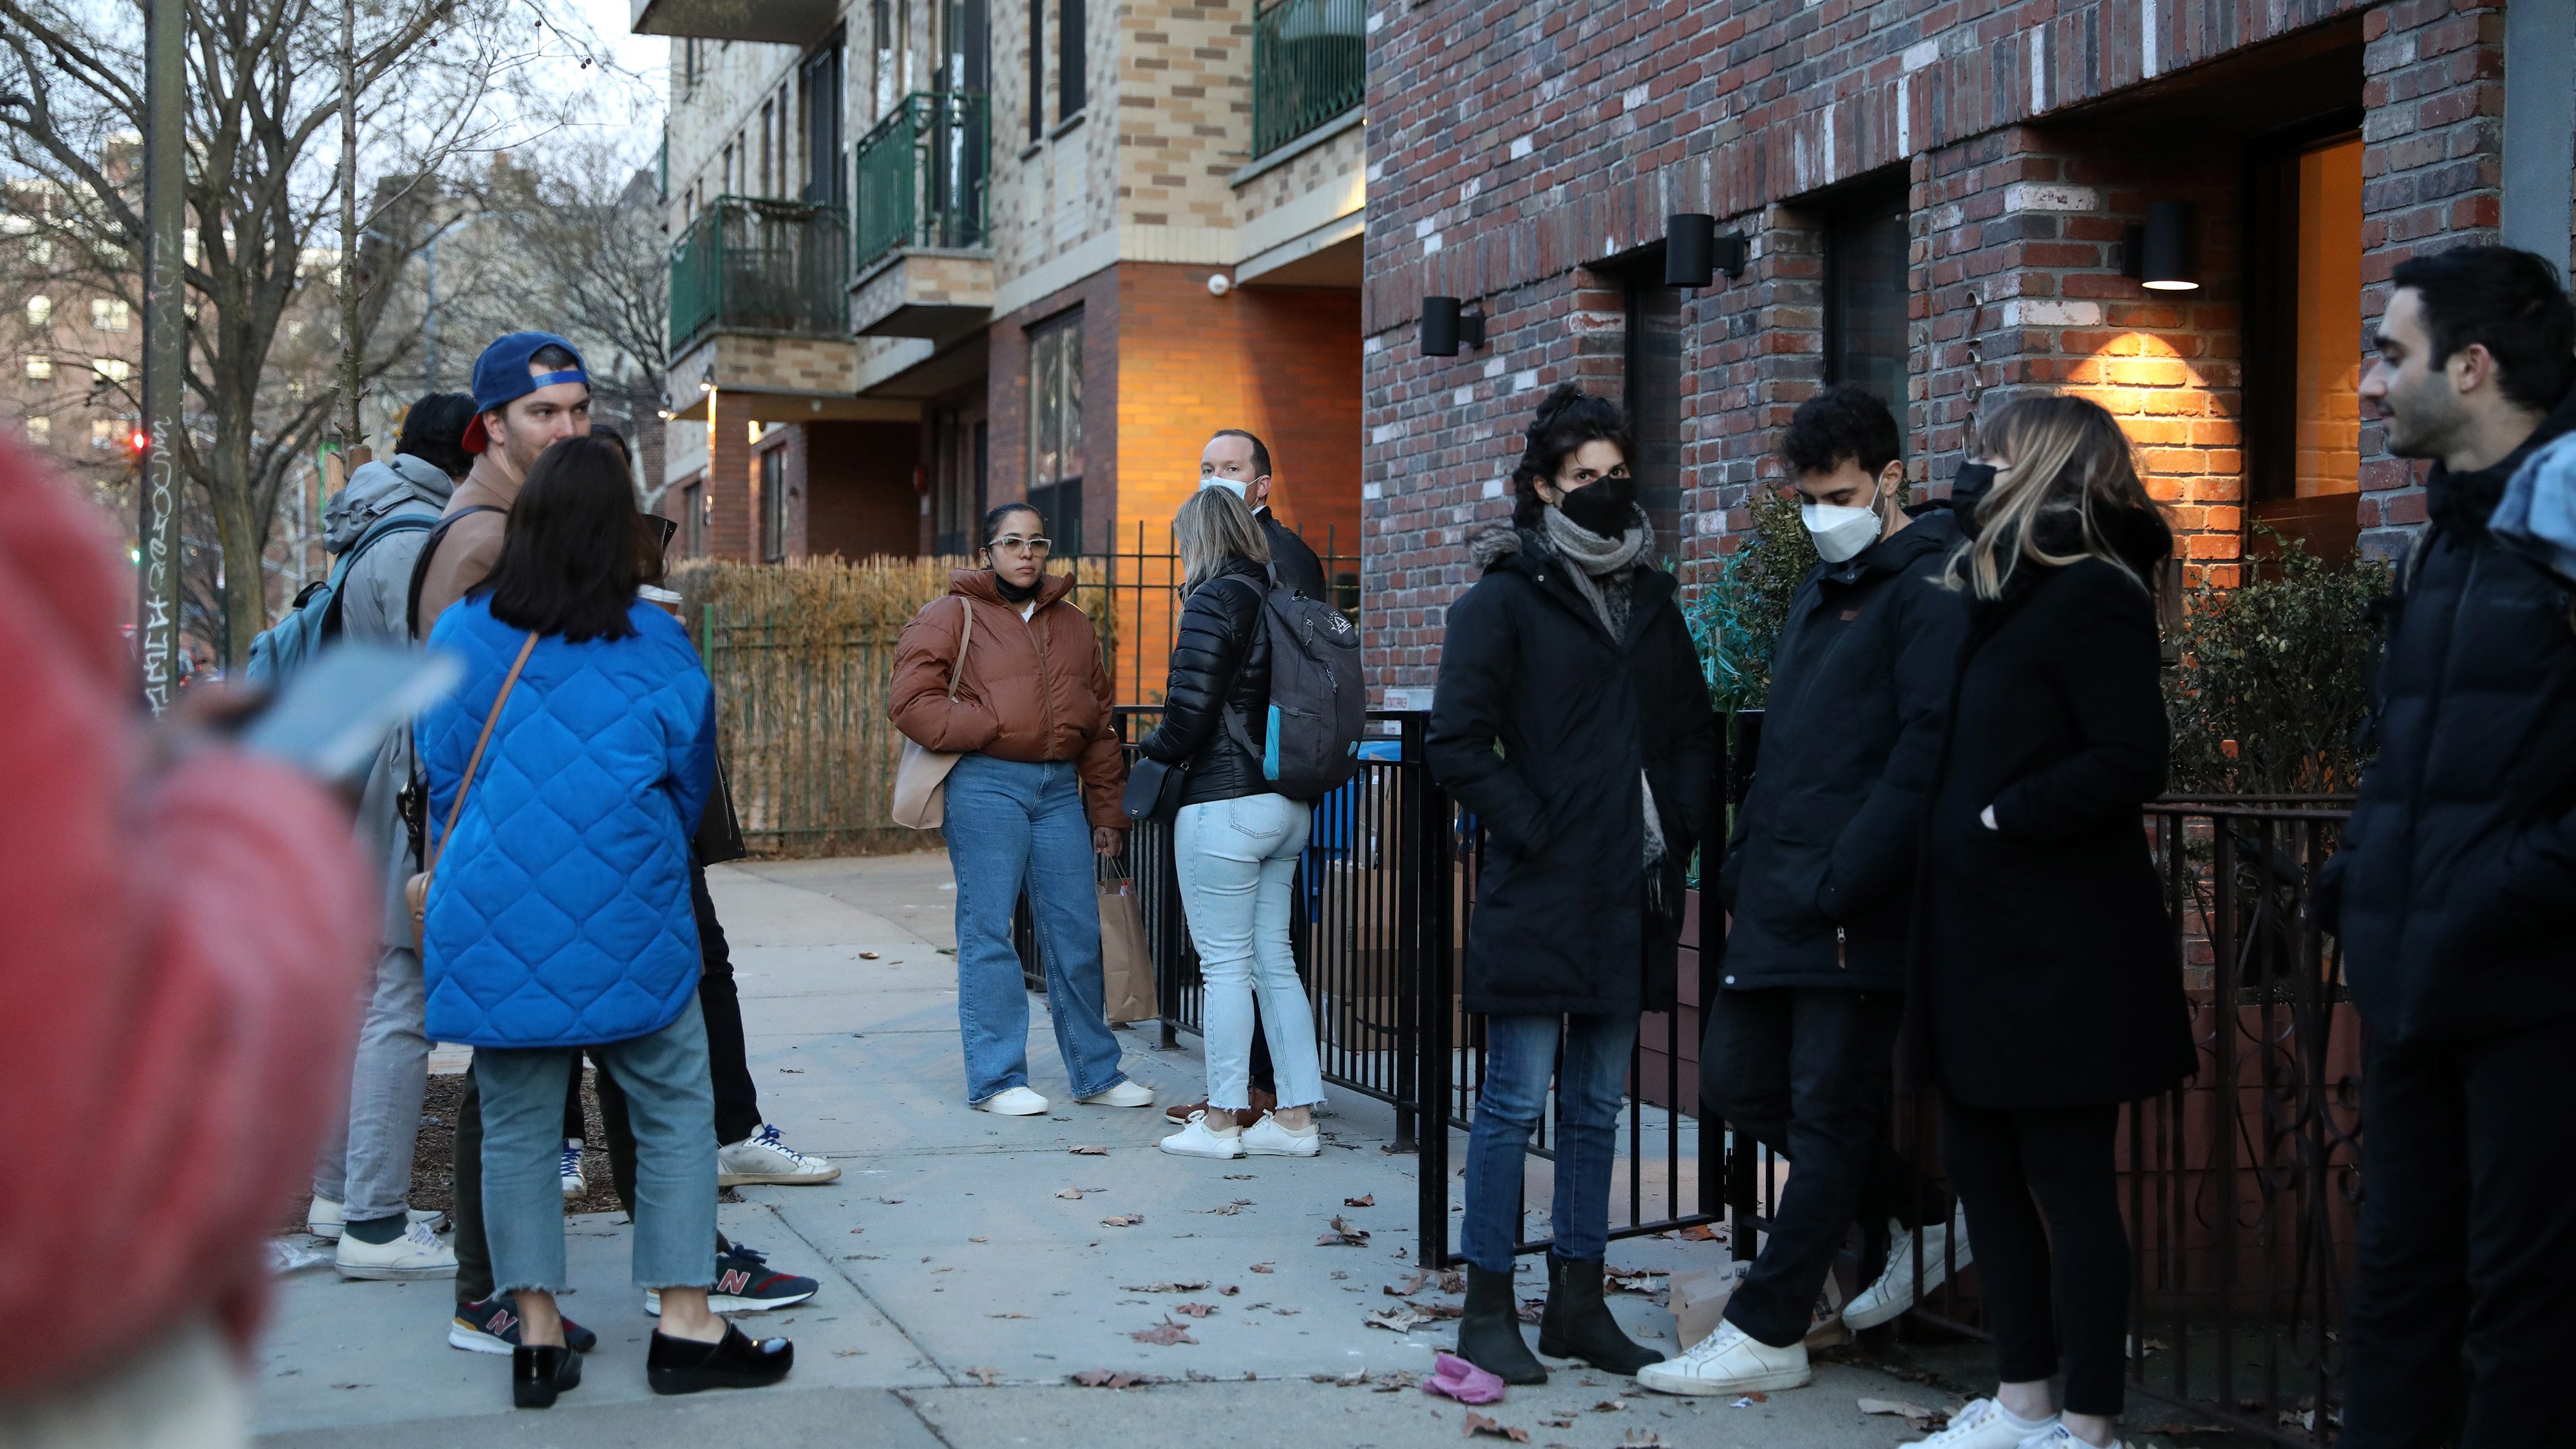 Prospective renters wait outside to enter an apartment unit during an open house in the Williamsburg neighborhood in Brooklyn. Photographer: Bess Adler/Bloomberg via Getty Images